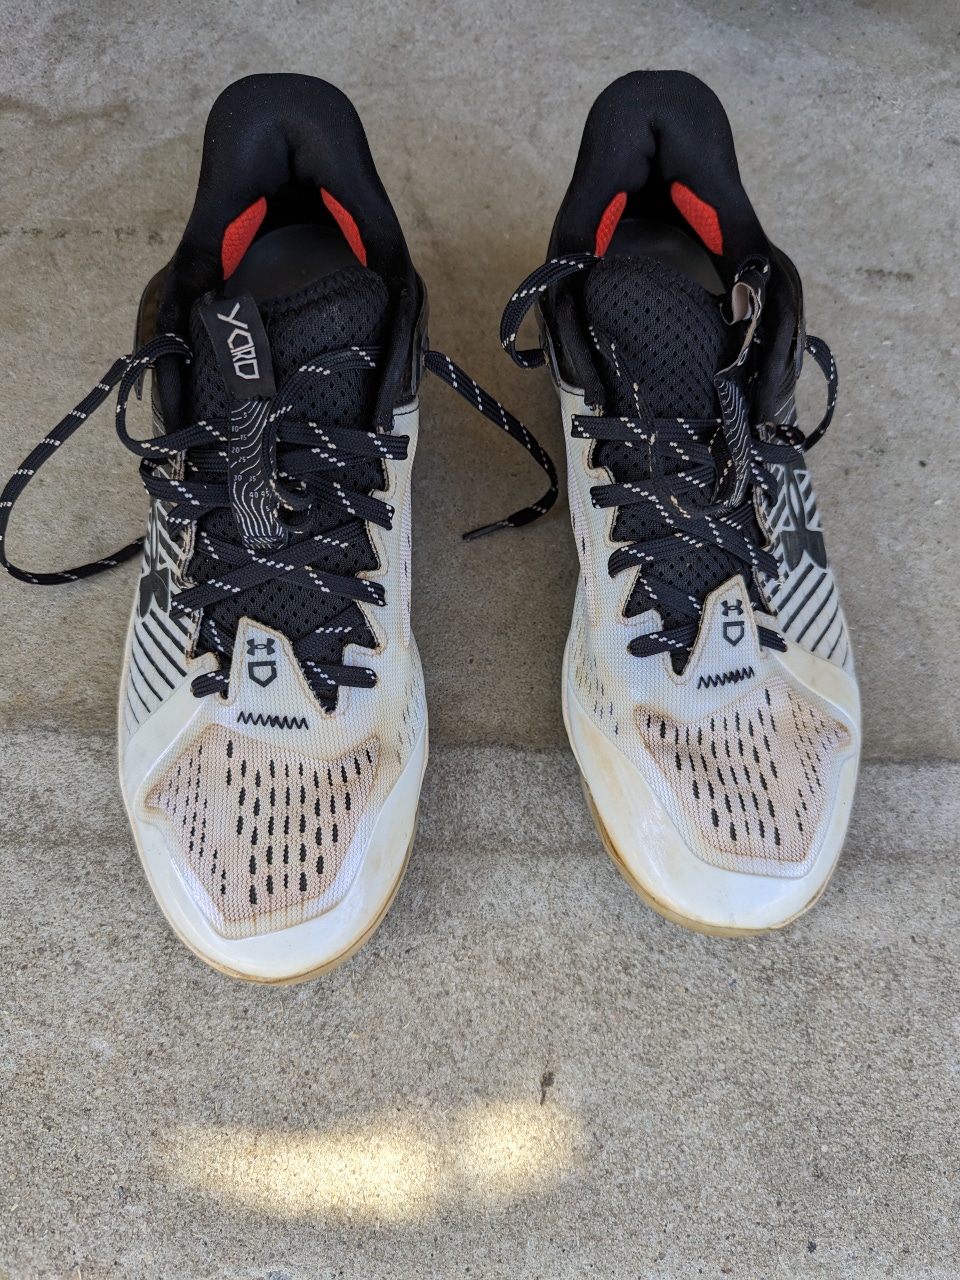 White/Black Used Size 10 Metal Under Armour